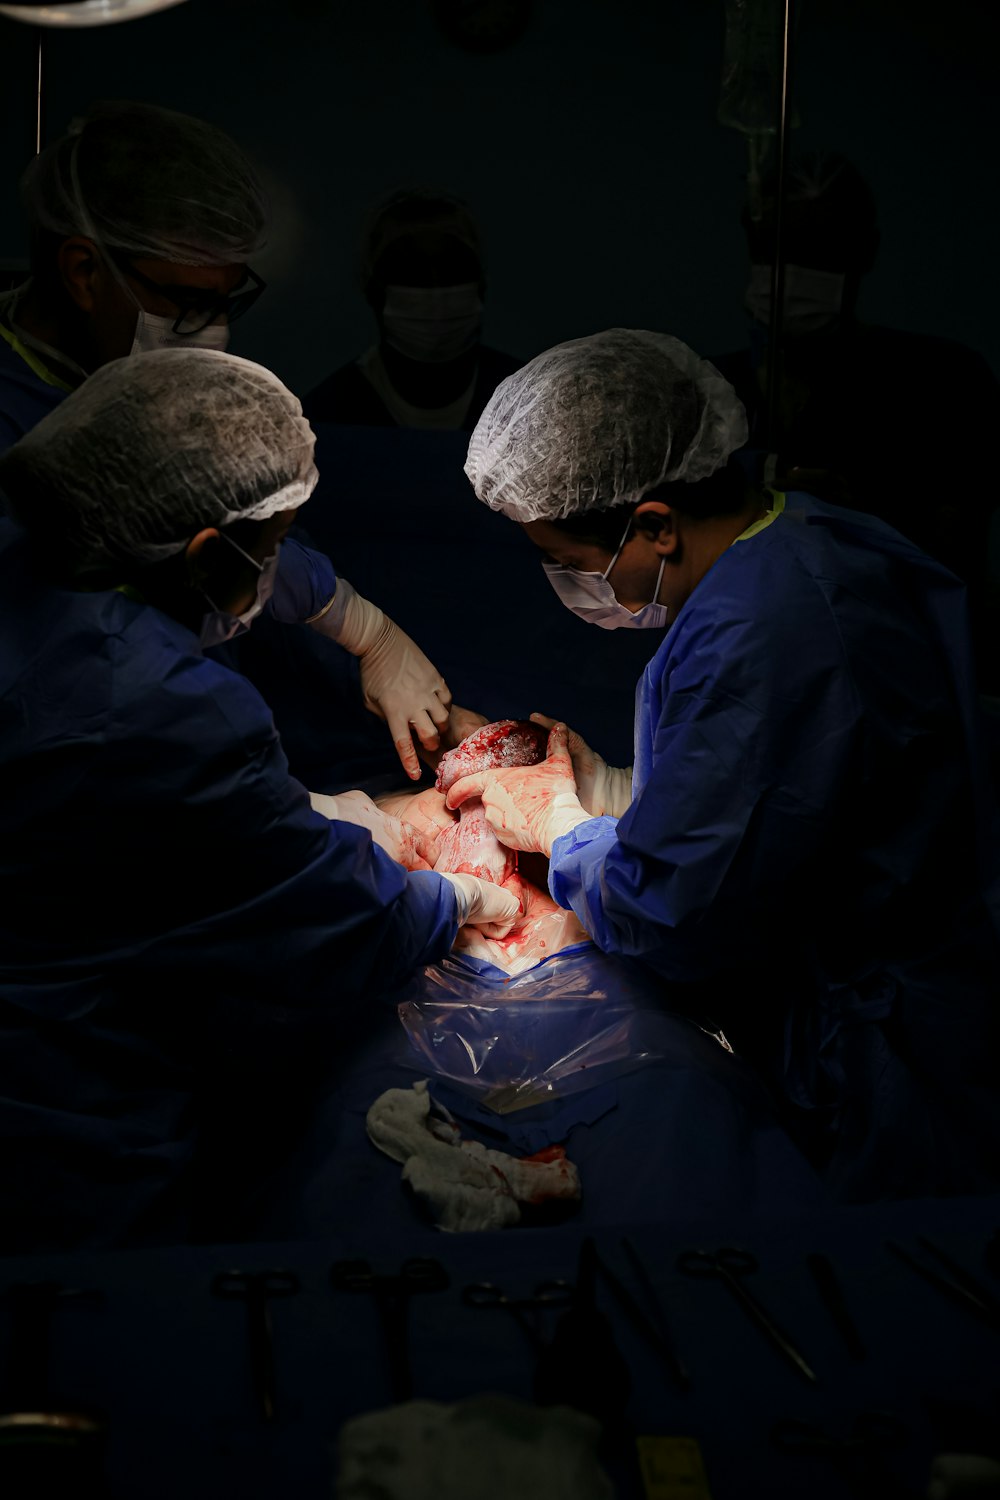 a group of doctors performing surgery on a patient